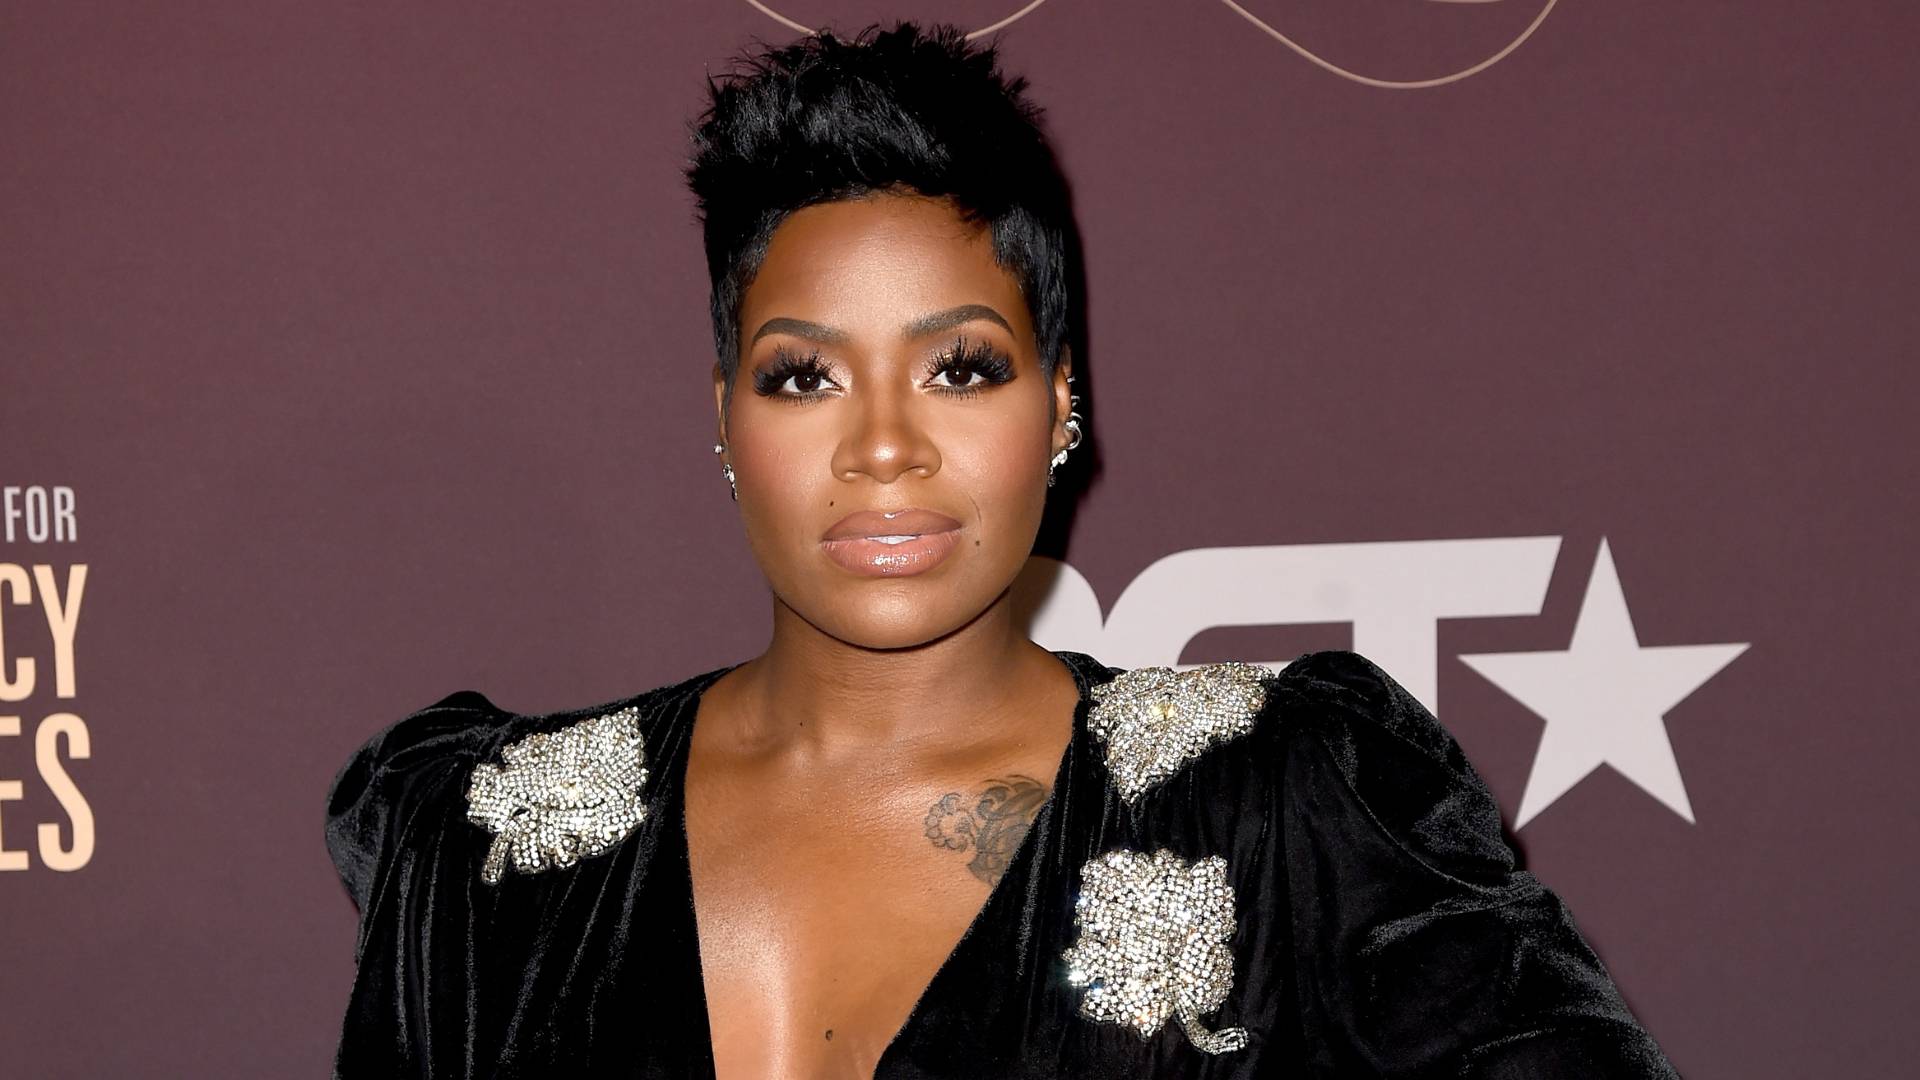 Fantasia Barrino at Q85: A Musical Celebration for Quincy Jones at the Microsoft Theatre on September 25, 2018 in Los Angeles, California. 